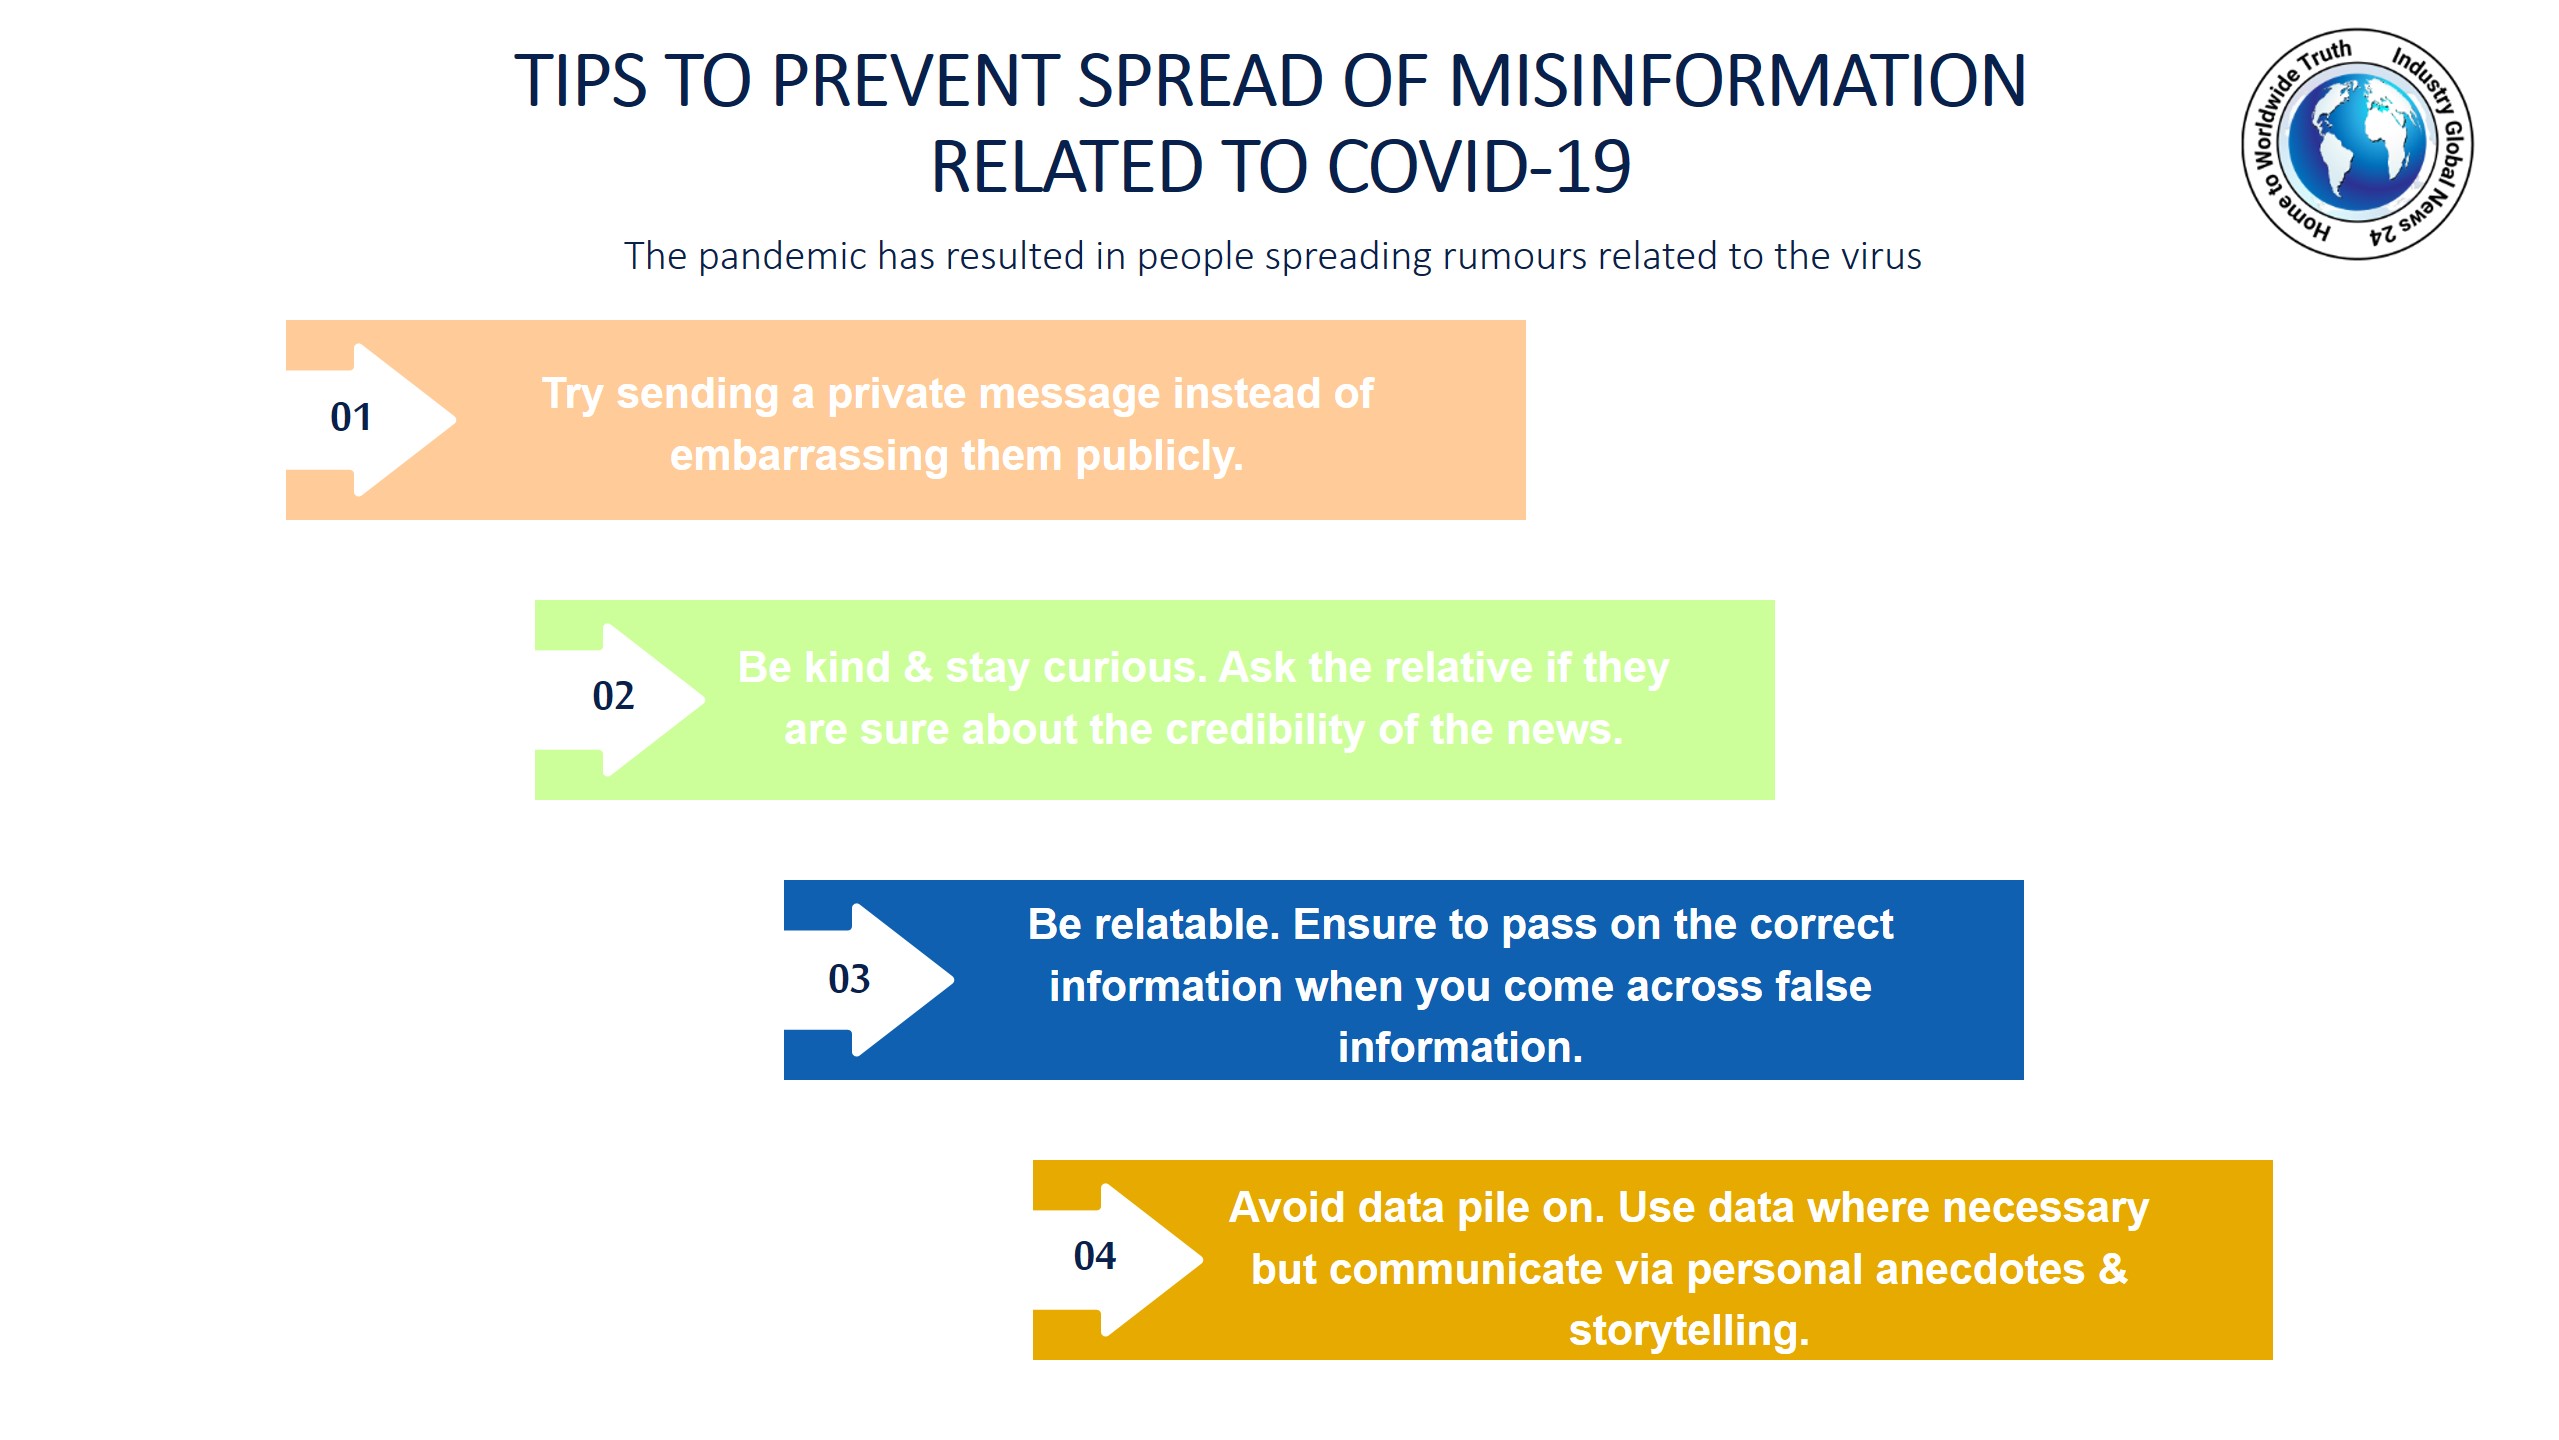 Tips to prevent spread of misinformation related to COVID-19